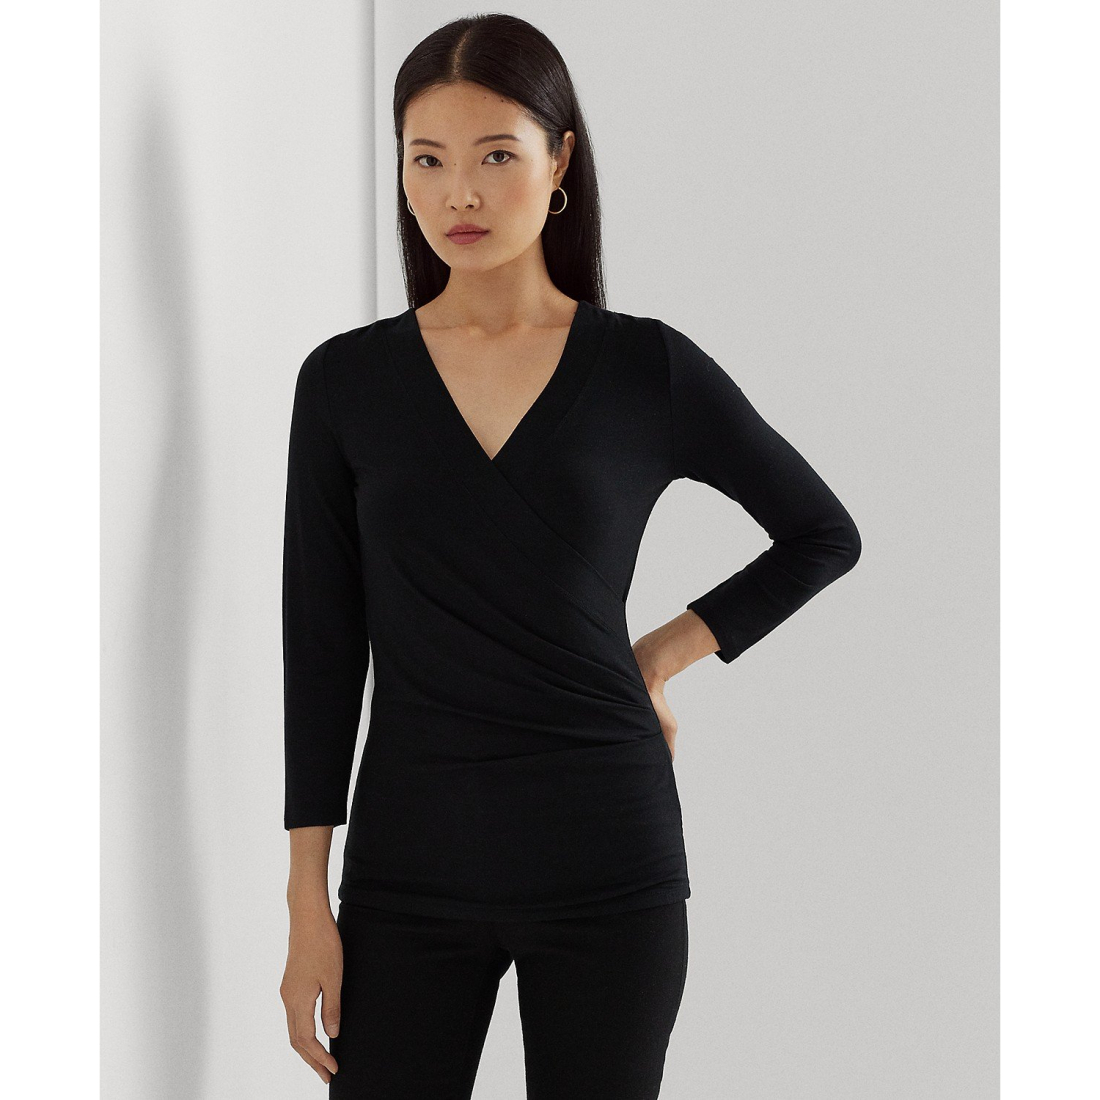 Women's 'Ruched' 3/4 sleeve Top